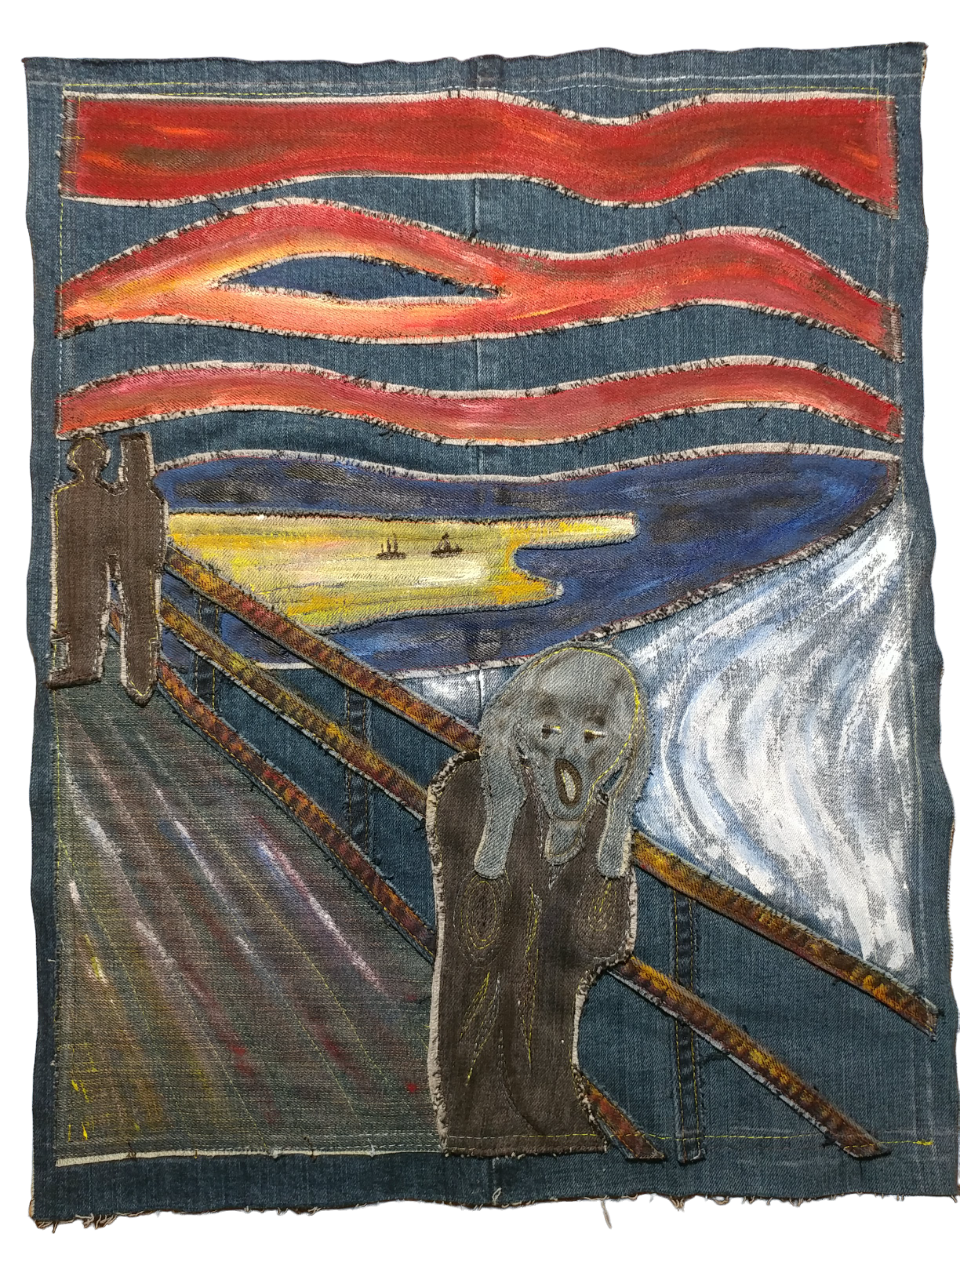 It’s the turn of the appearance of Munch’s denim “Scream”